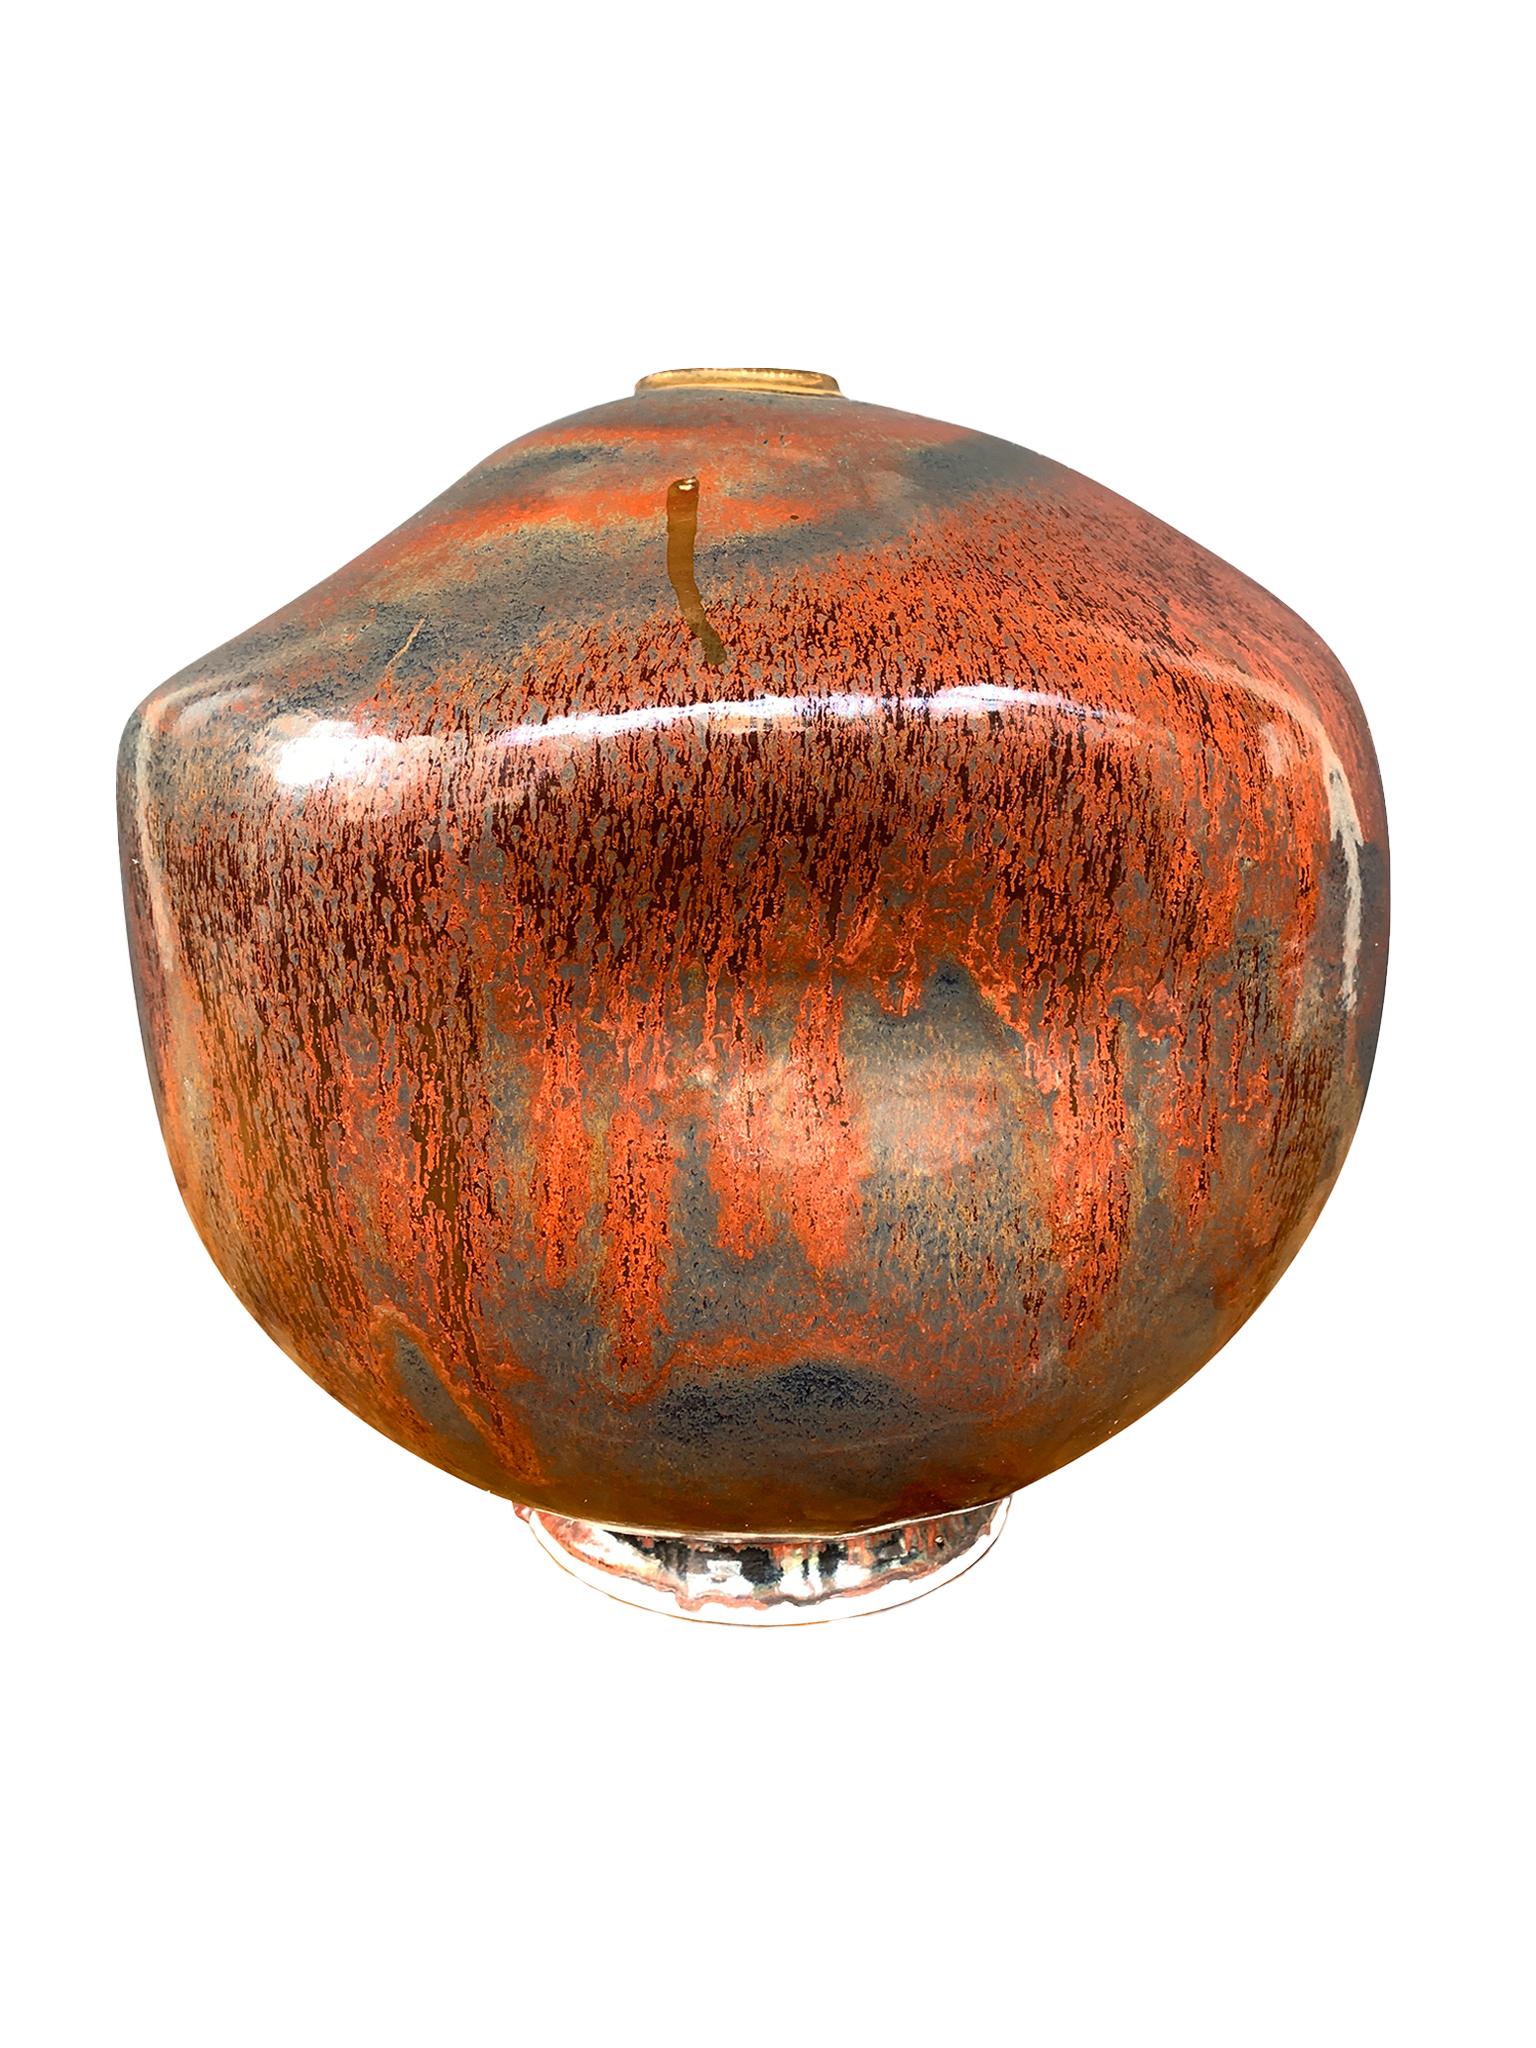 From Thom Lussier's Golden Patina Collection - a series of ceramic vessels with rich, colorful surfaces that evoke both terrestrial and otherworldly terrain. This vessel has a whimsical 